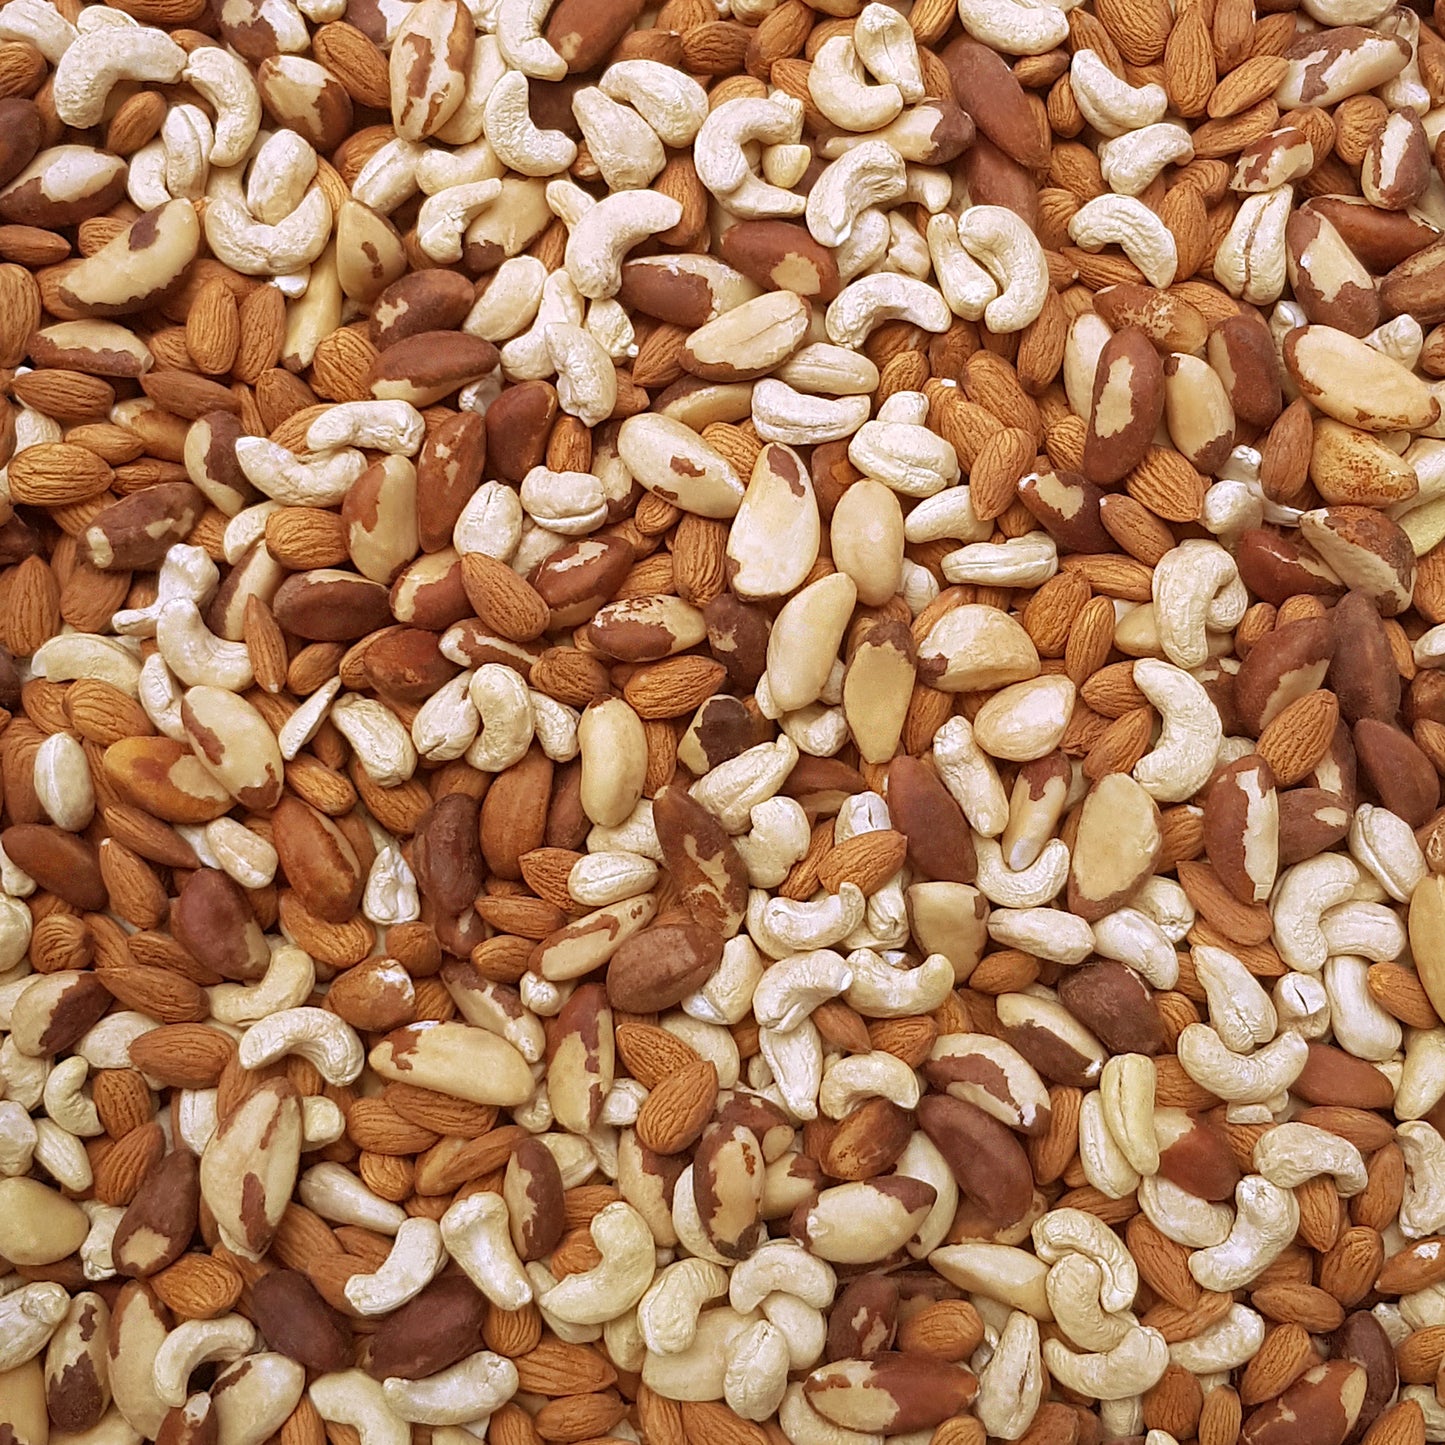 Full frame overhead image of BY NATURE Mixed Nuts - almonds, brazil nuts, cashew nuts, raw.